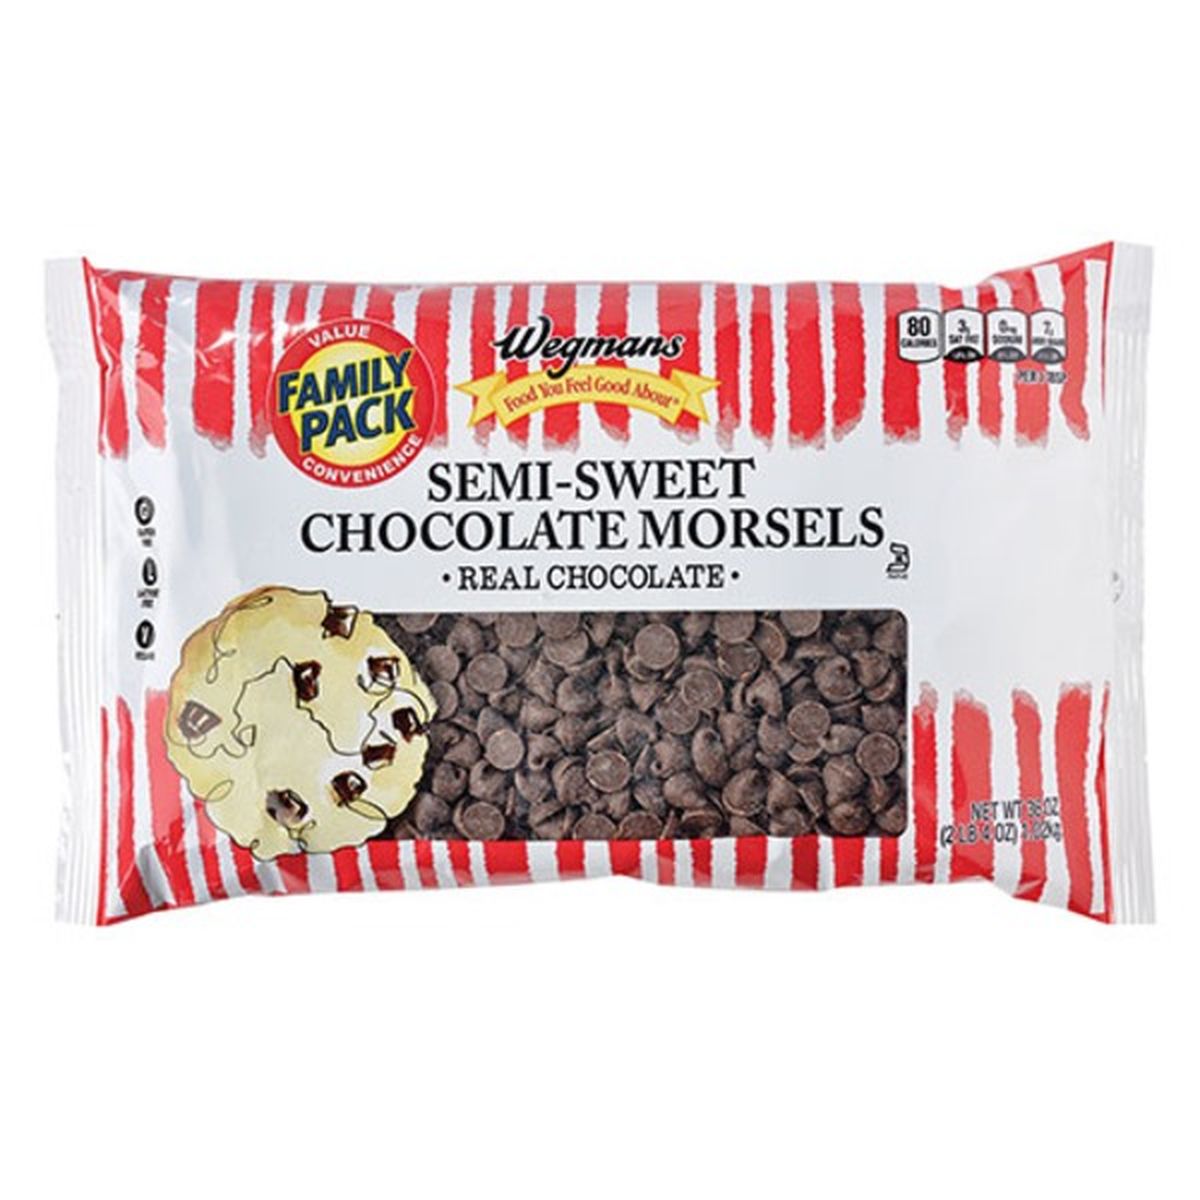 Calories in Wegmans Semi-Sweet Chocolate Morsels, FAMILY PACK